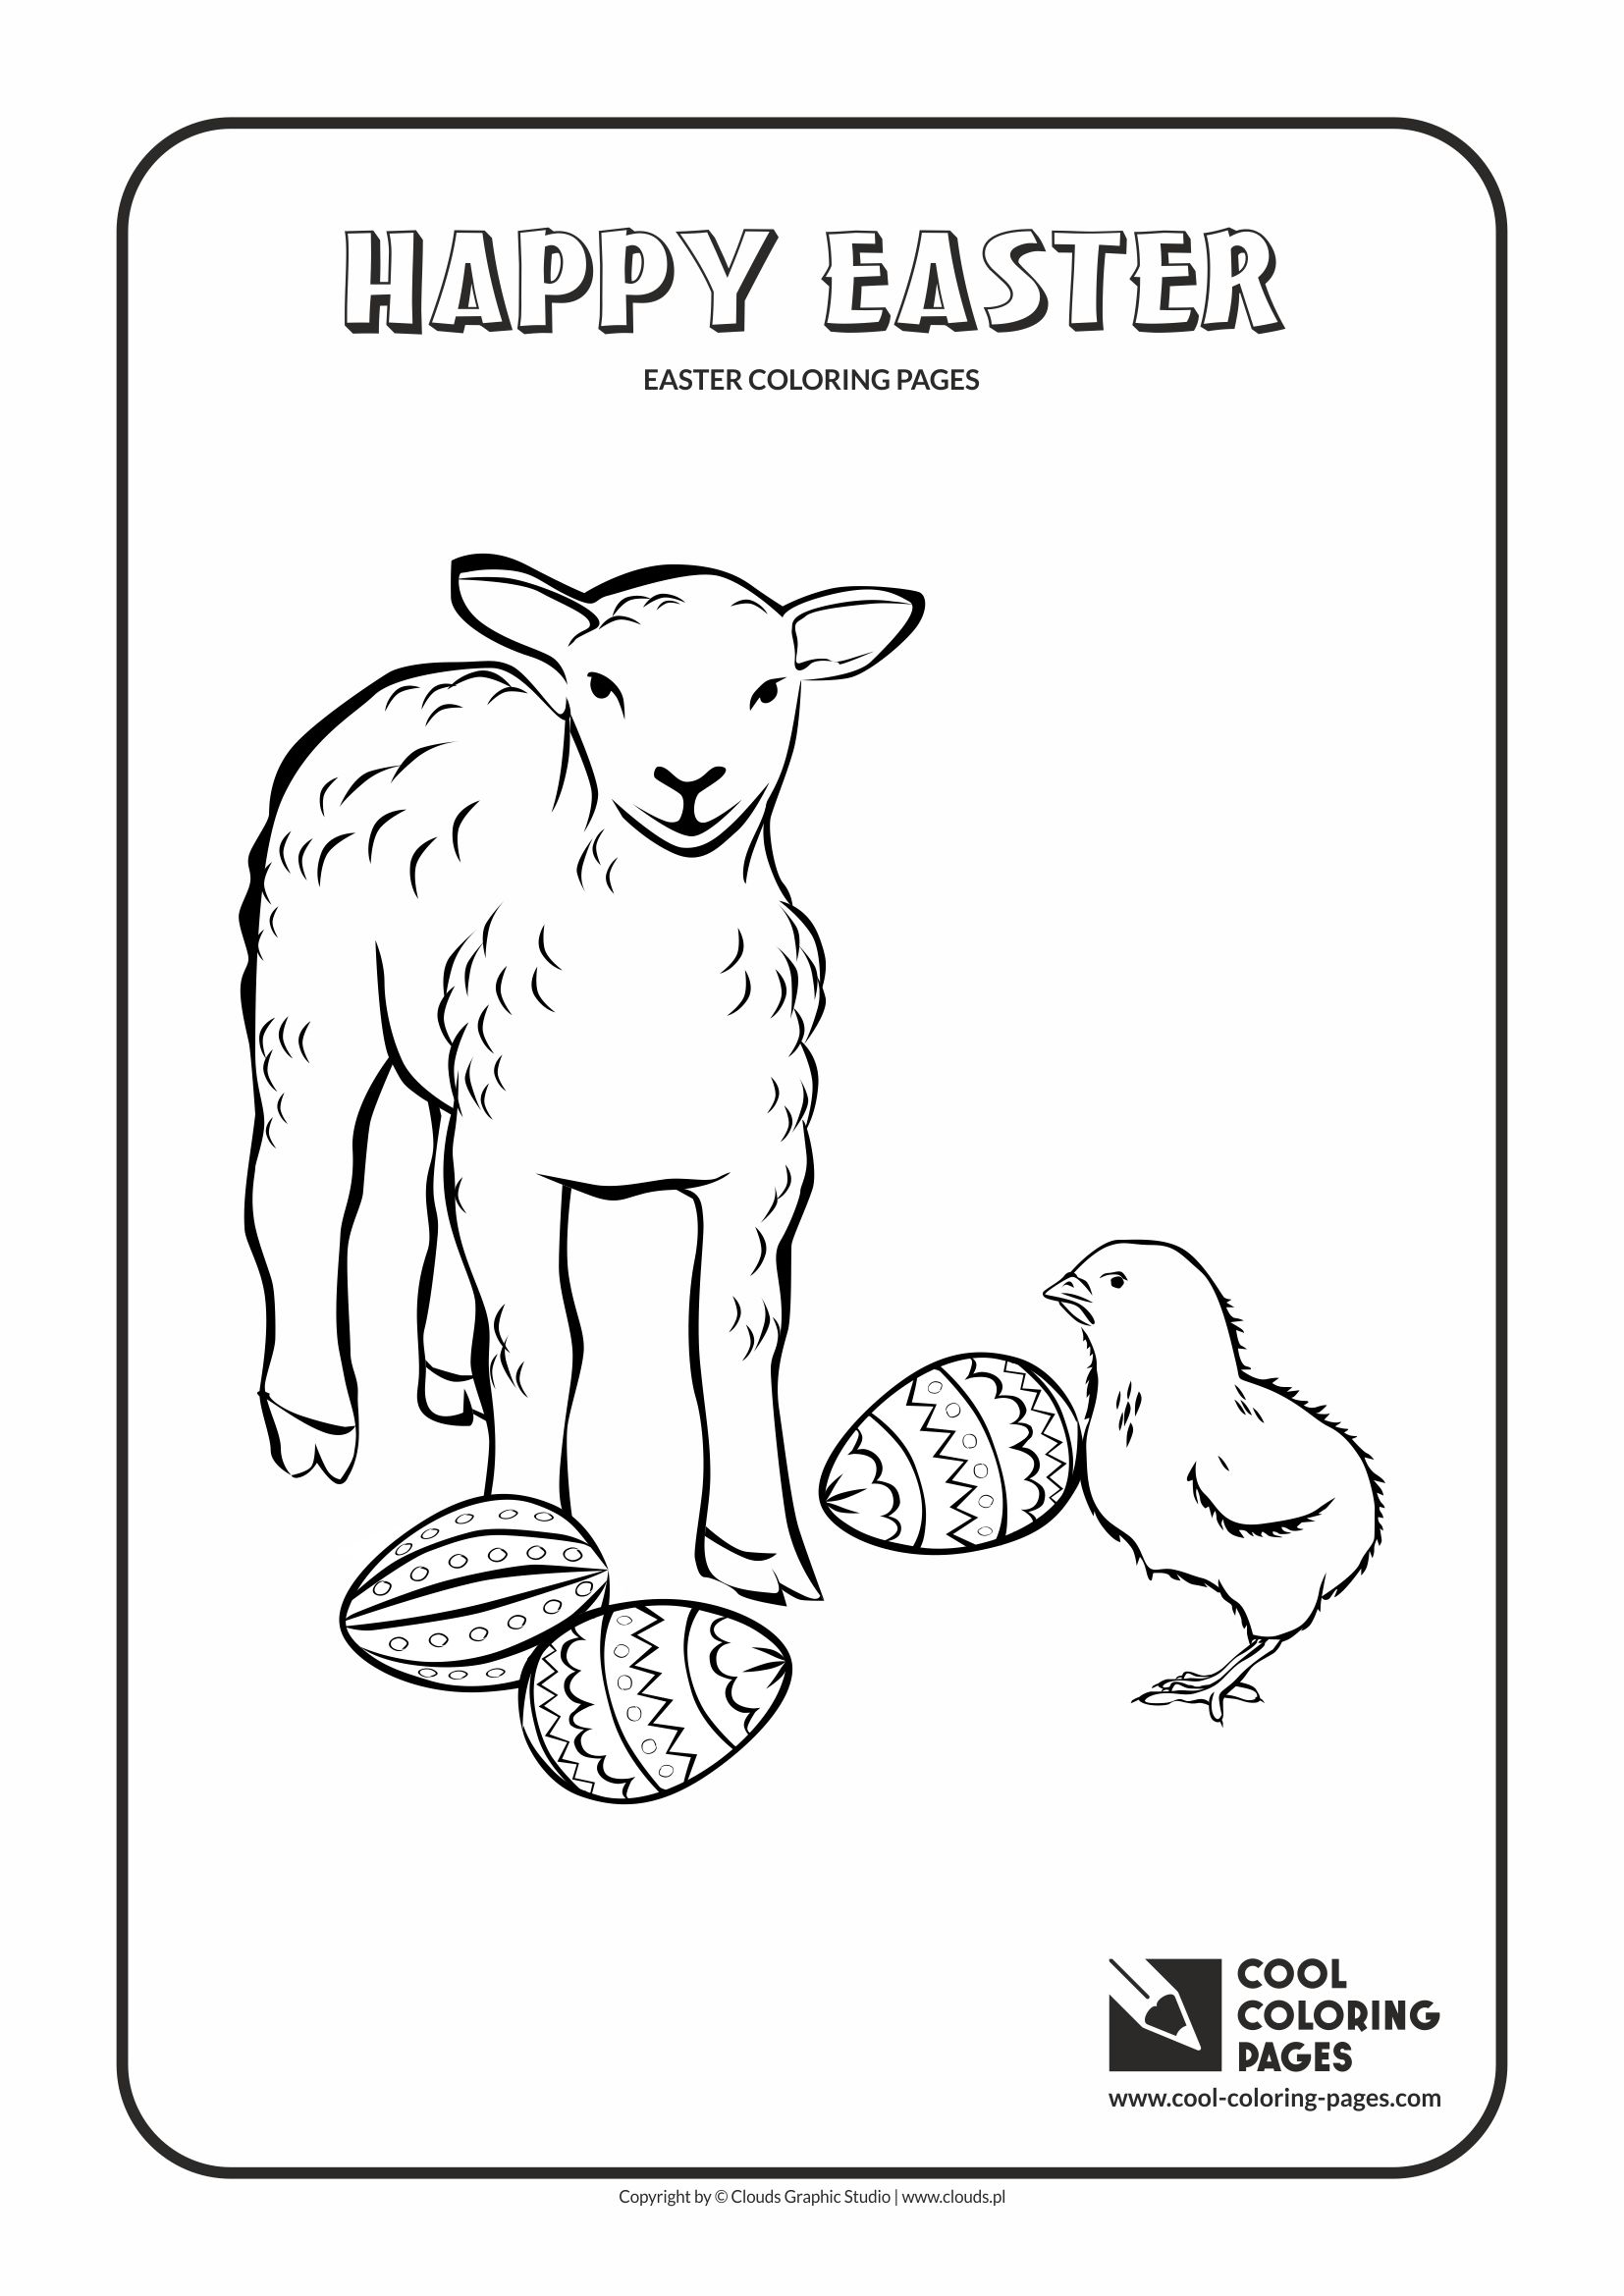 Cool Coloring Pages - Holidays / Easter lamb no 1 / Coloring page with Easter lamb no 1